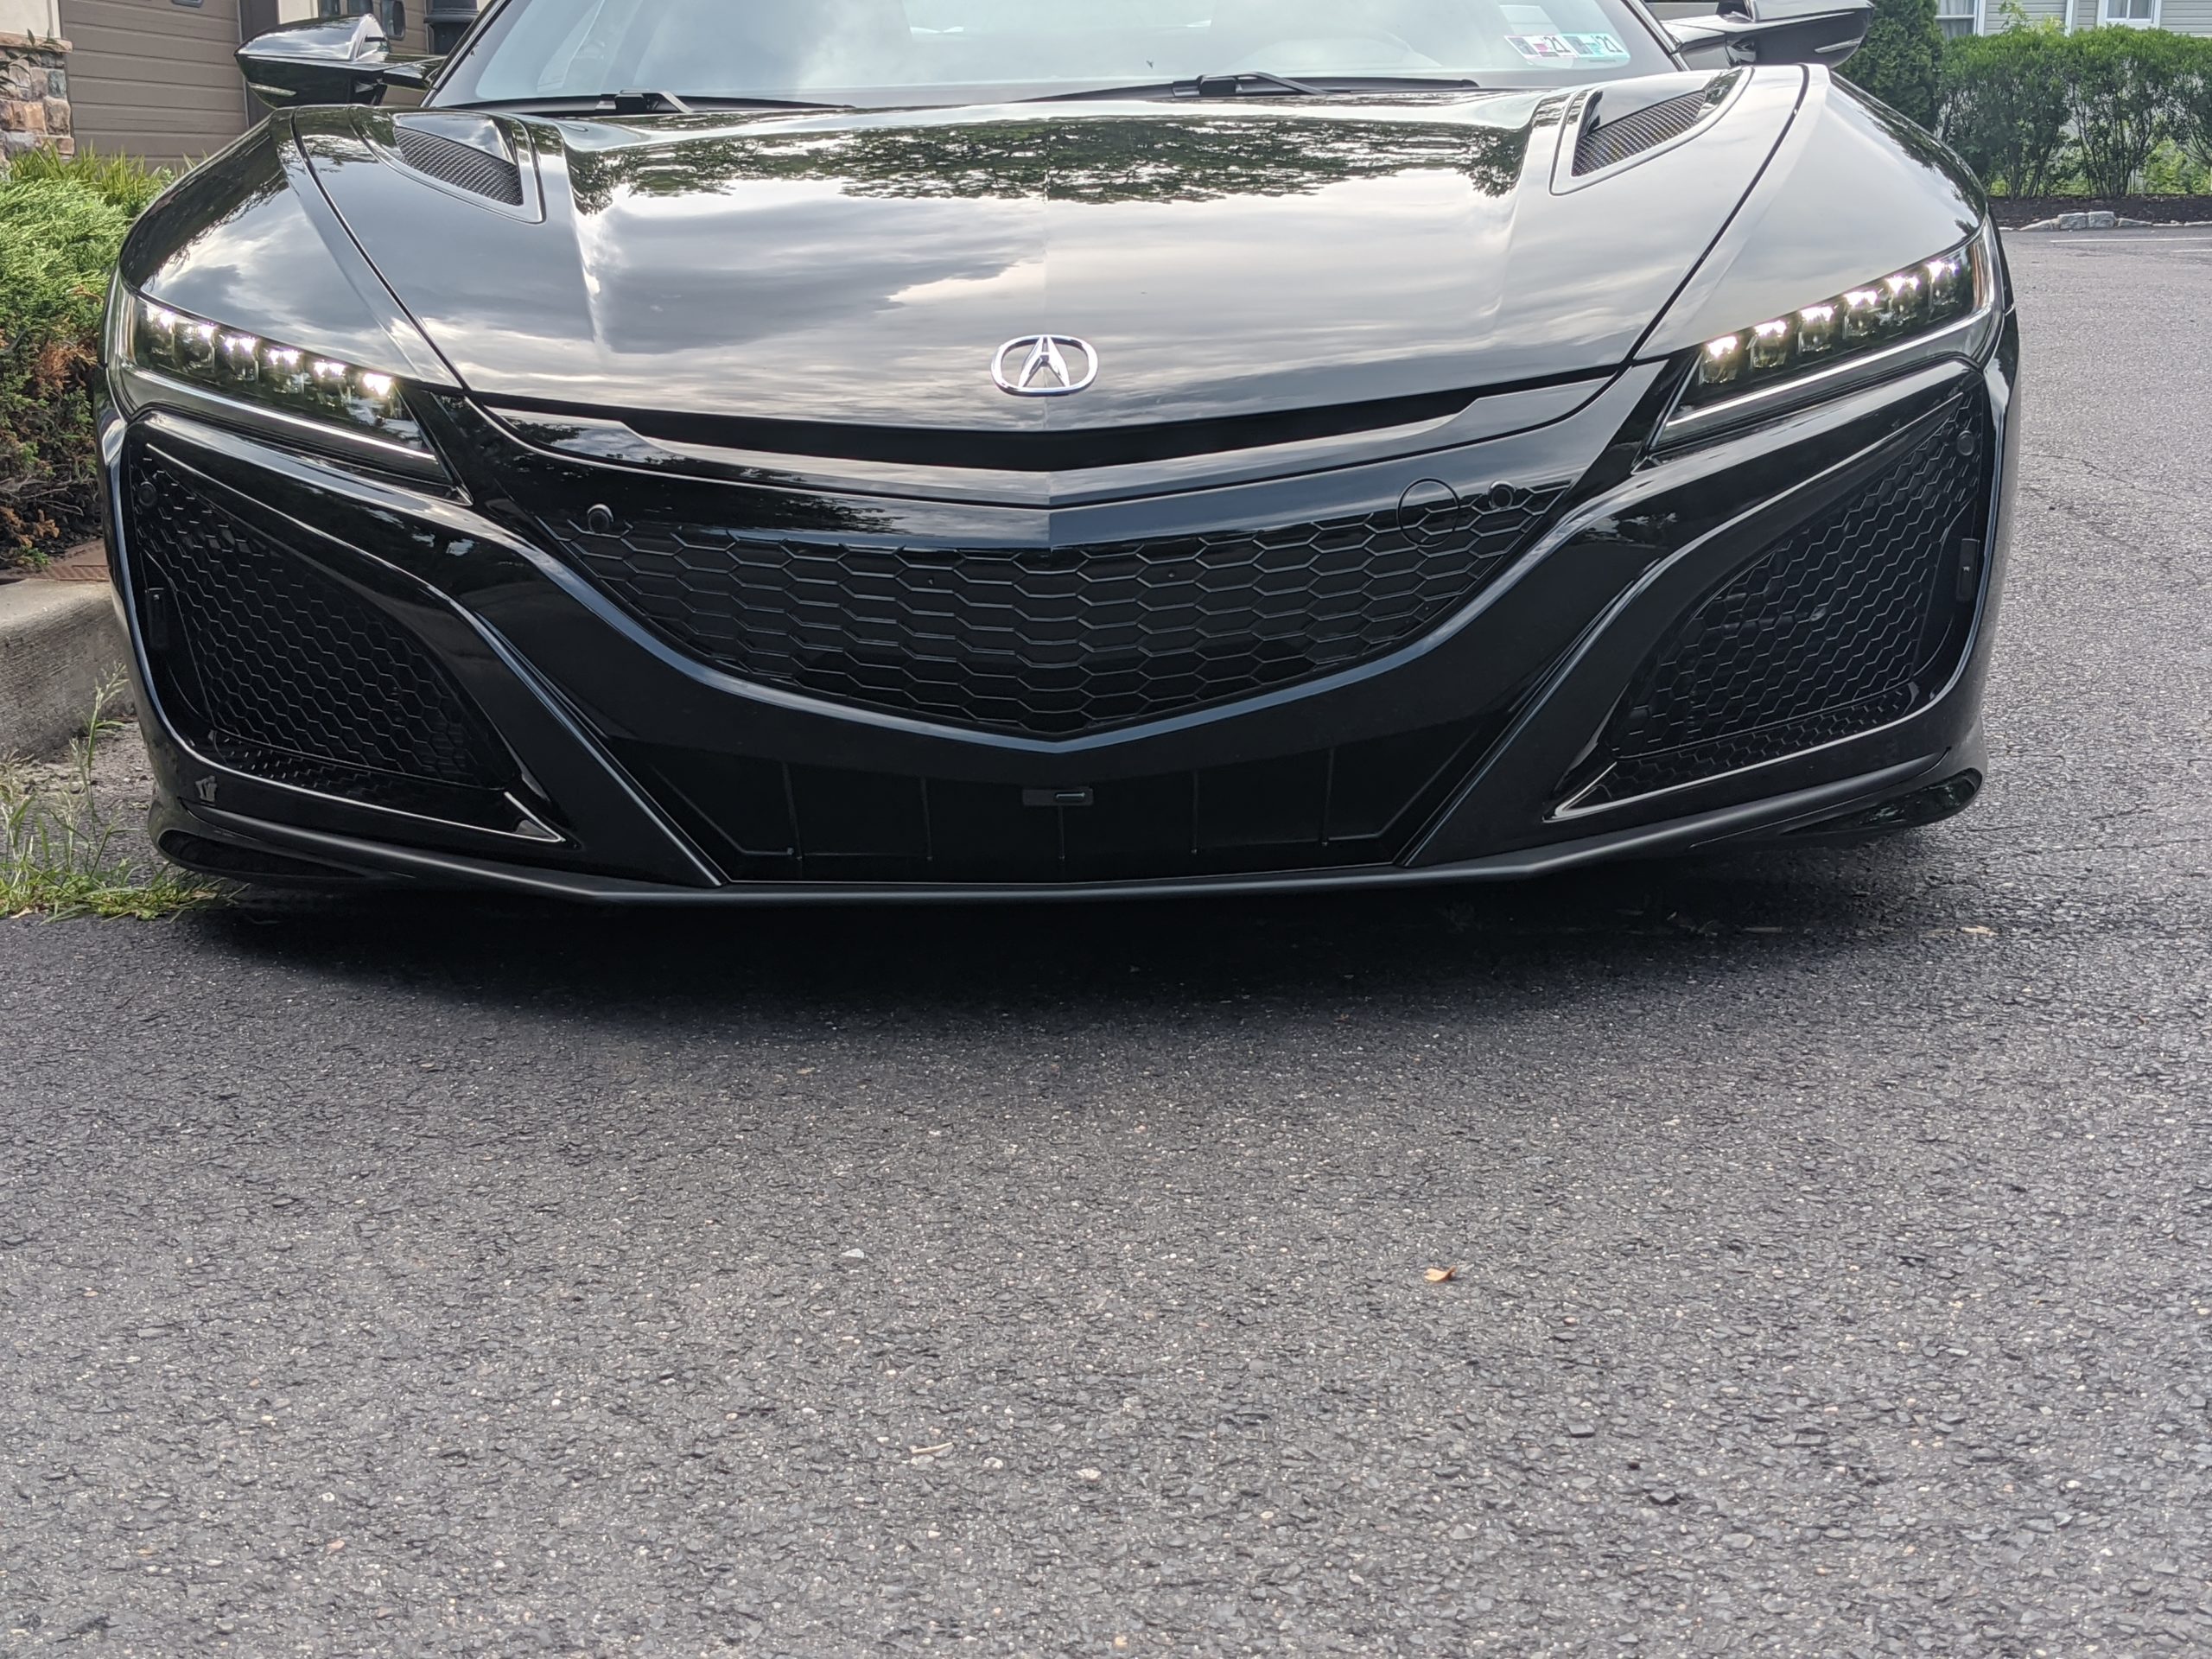 K40 Laser jammers on a 2020 Acura NSX